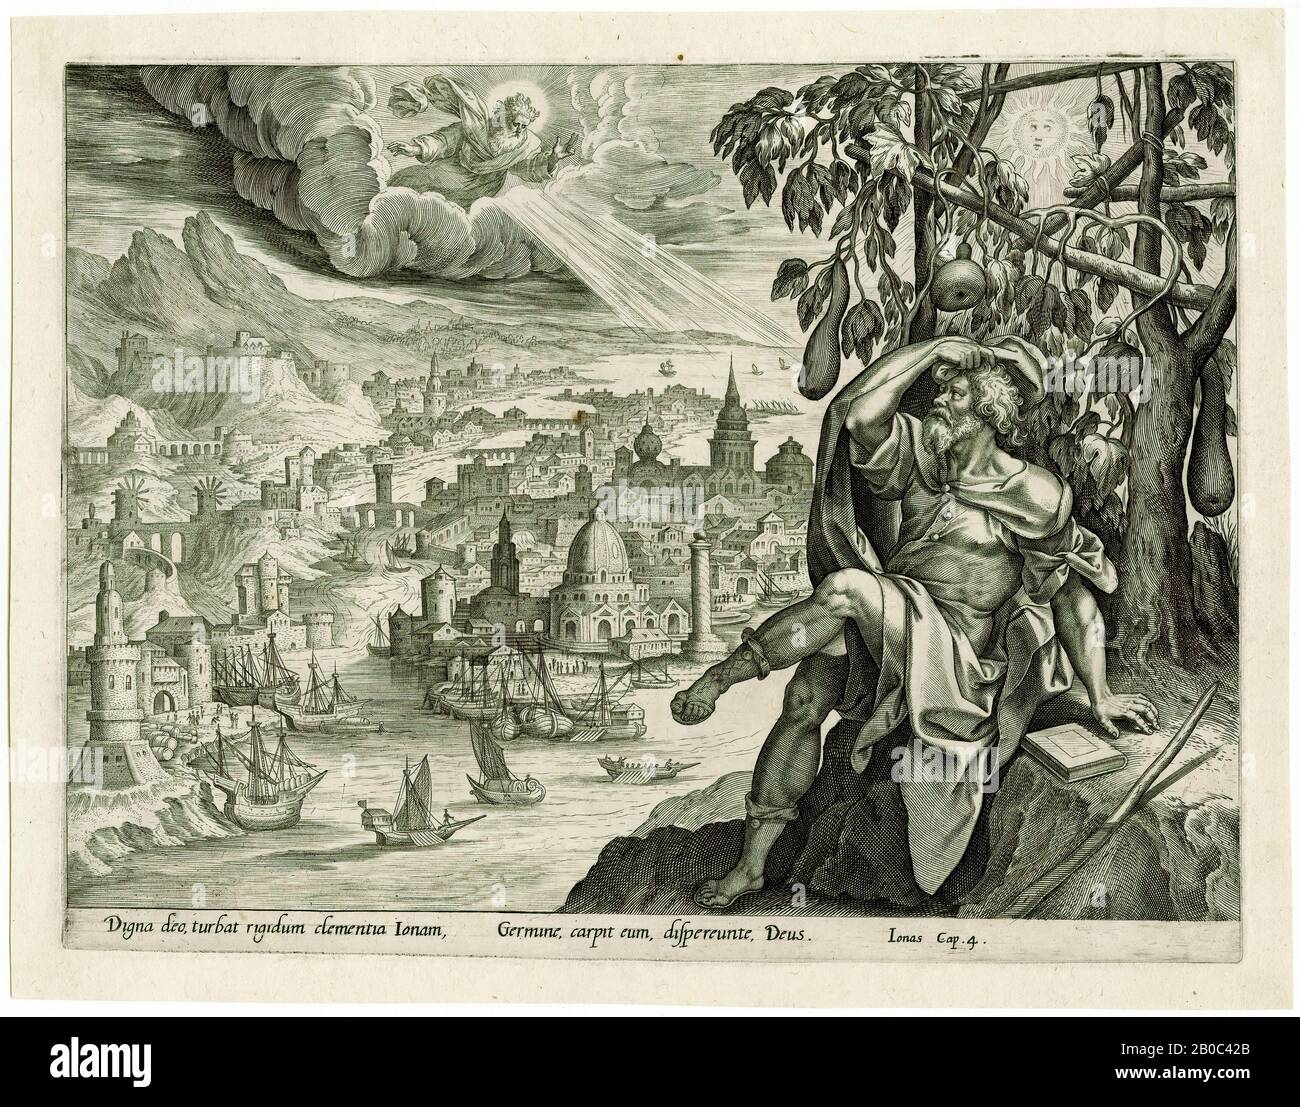 Hieronymus Wierix, Jonah Seated under a Bower, The Story of Jonah, pl. 4, after Marten de Vos, n.d., engraving on cream laid paper, 8 1/4 in. x 10 13/16 in. (20.96 cm x 27.46 cm Stock Photo